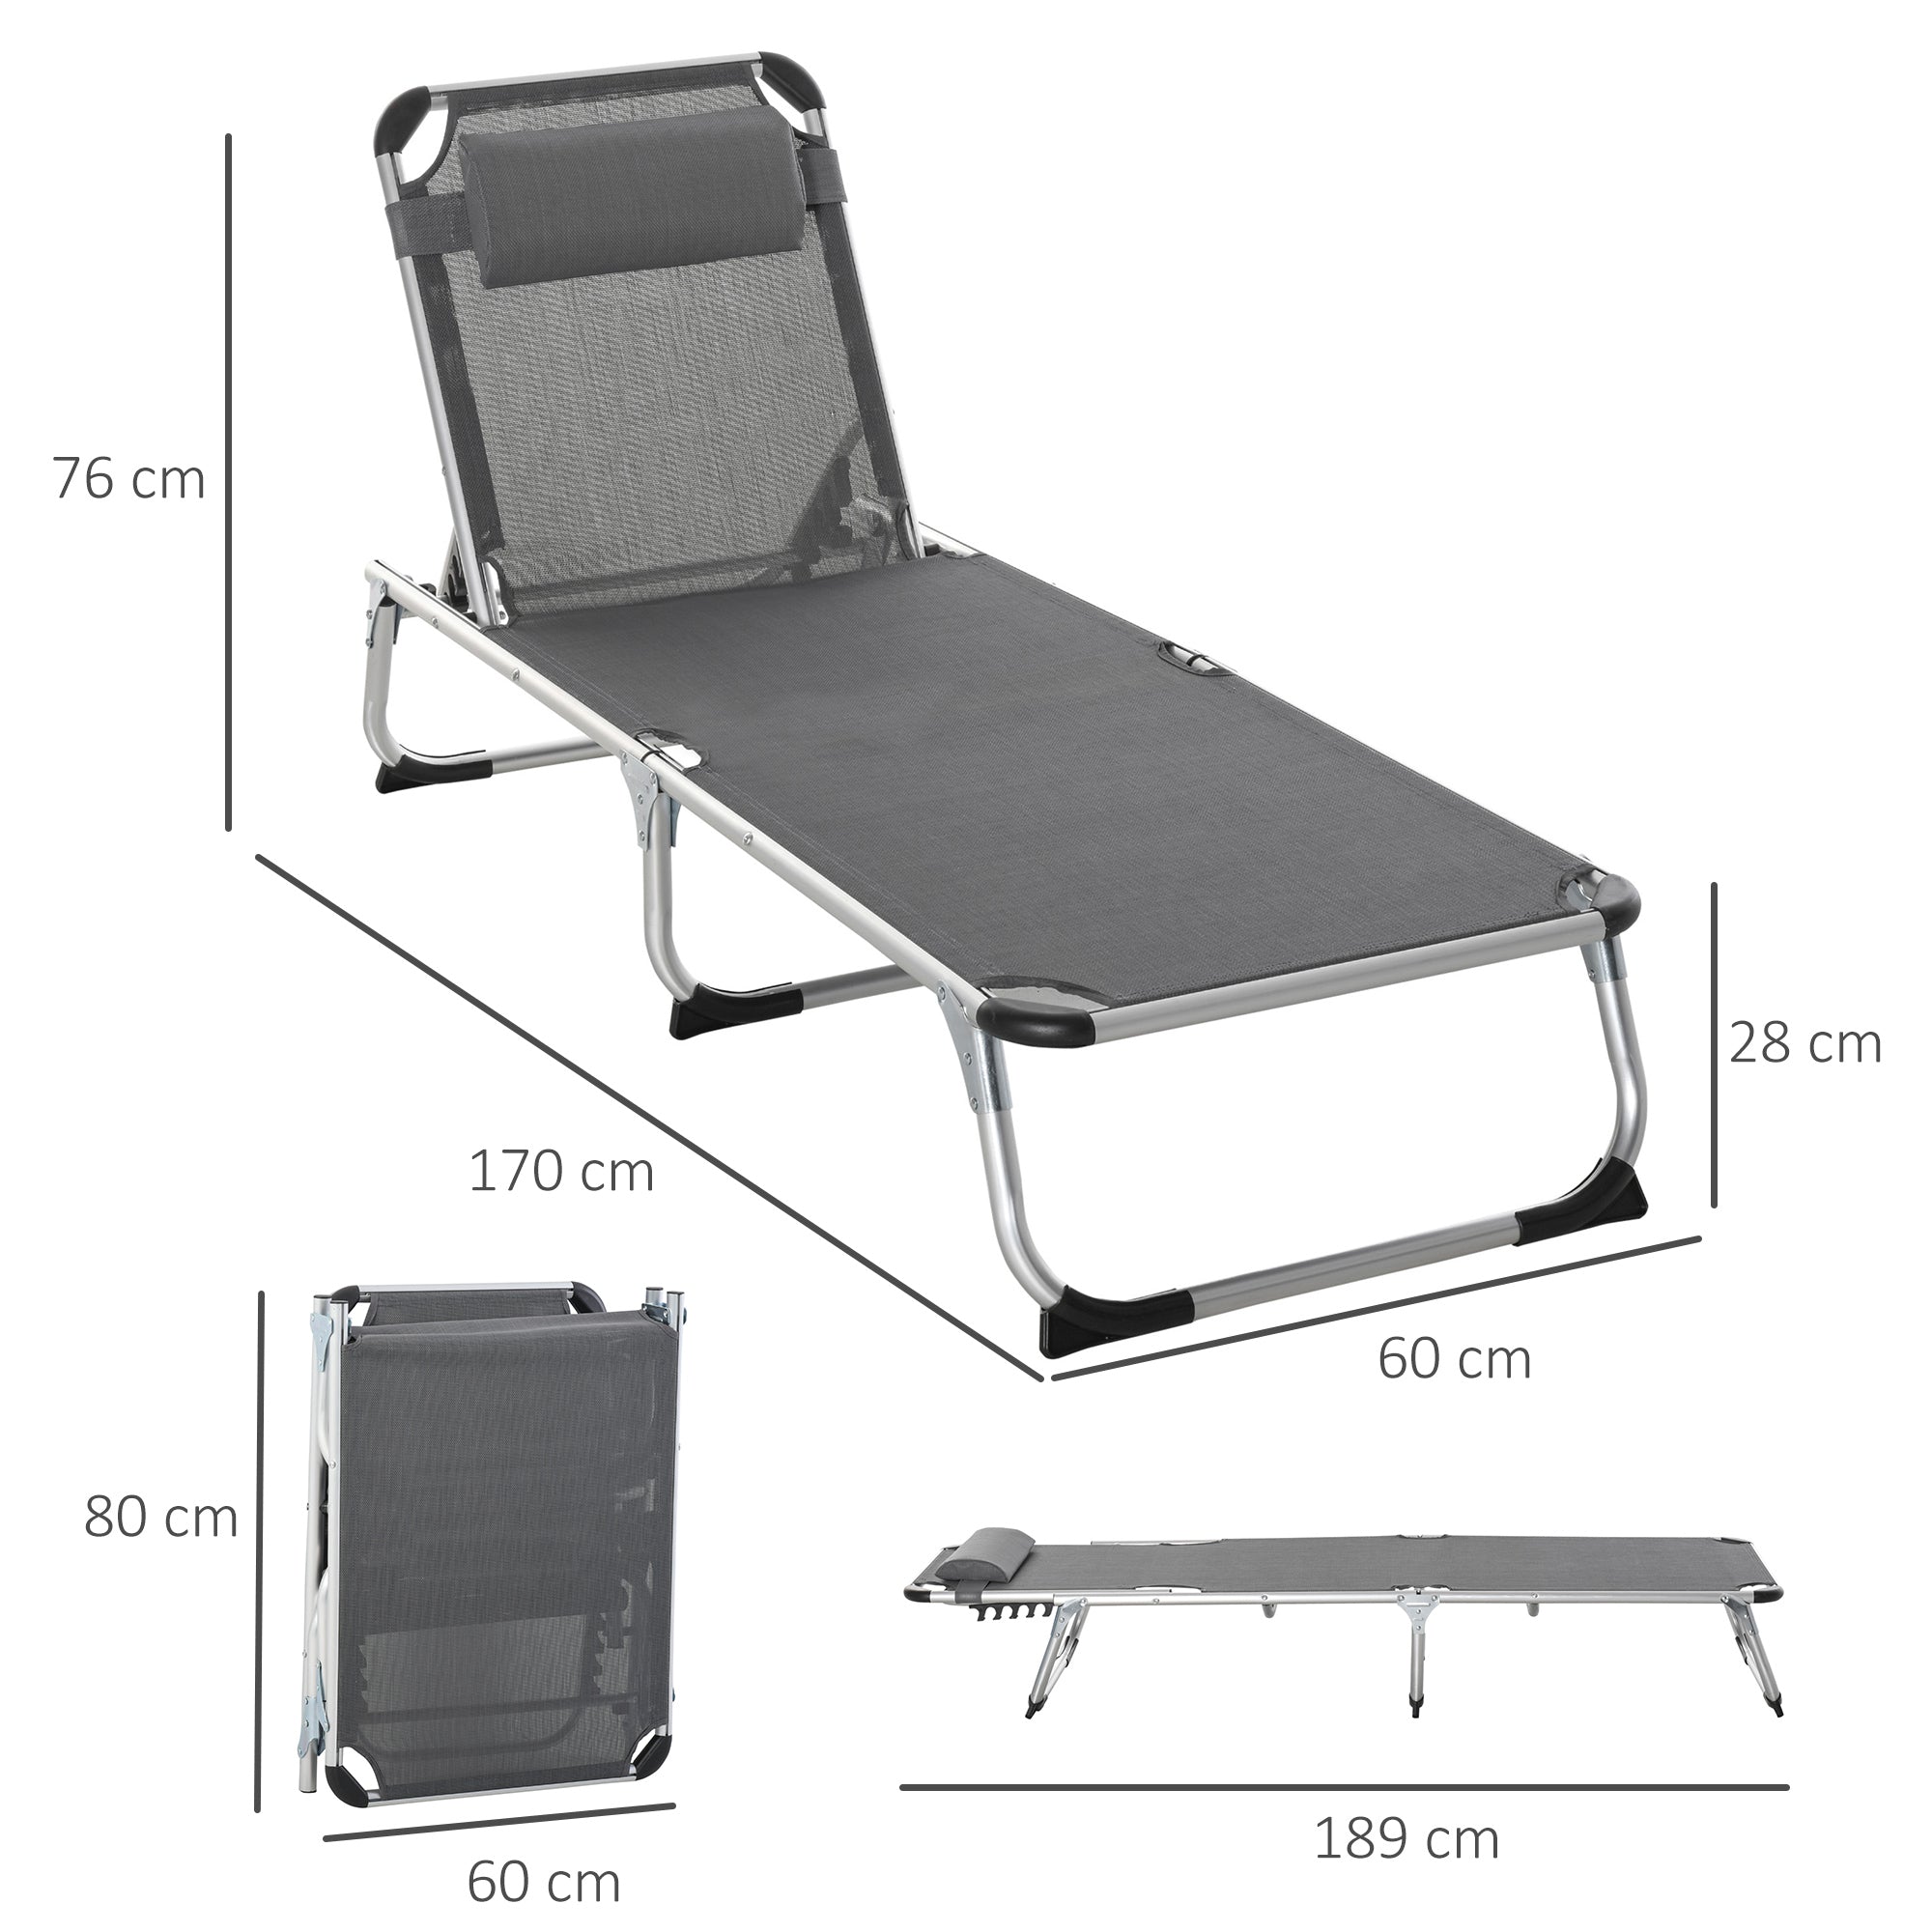 Outsunny Foldable Reclining Sun Lounger Lounge Chair Camping Bed Cot with Pillow 5-Level Adjustable Back Aluminium Frame Grey - Inspirely